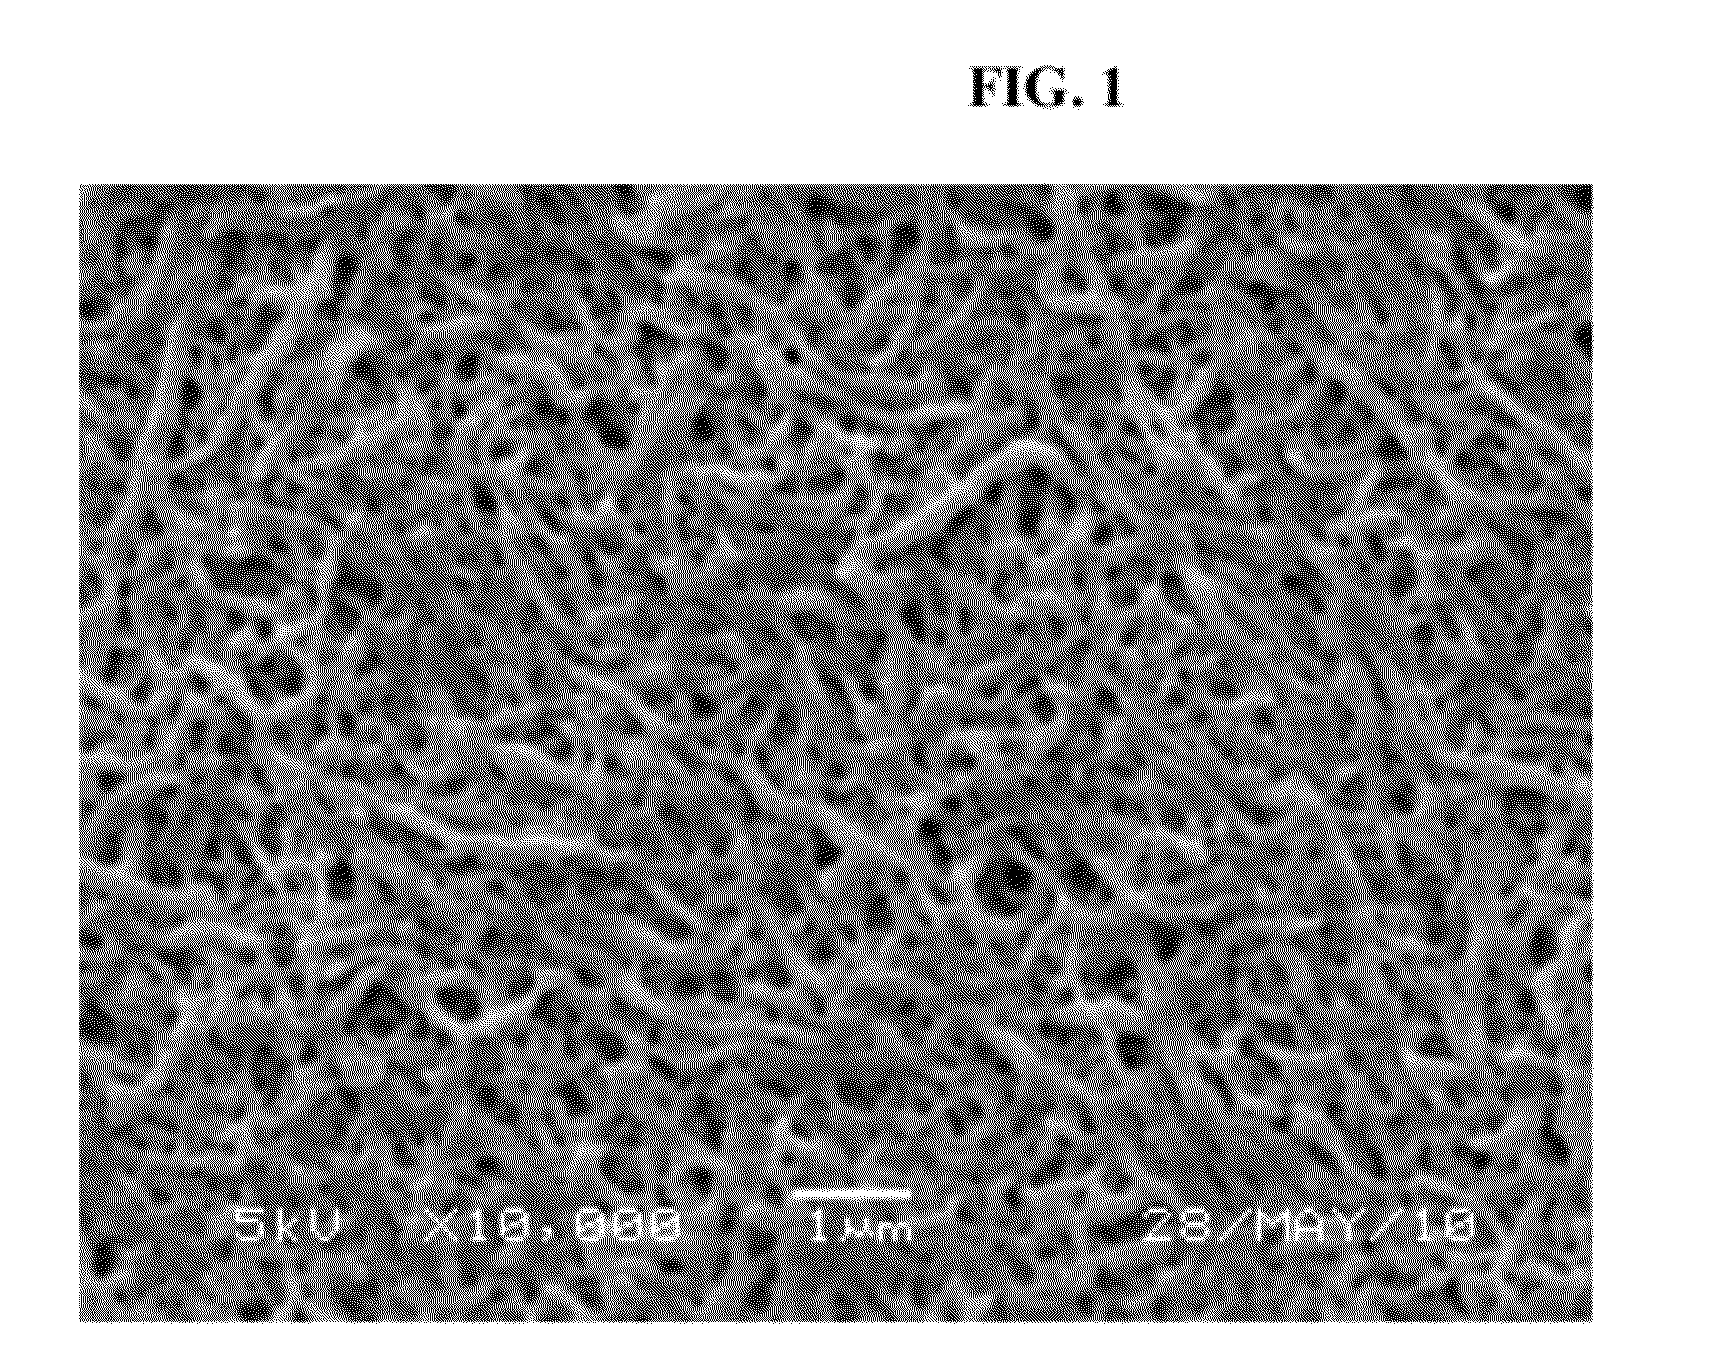 Bioabsorbable Polymeric Compositions, Processing Methods, and Medical Devices Therefrom